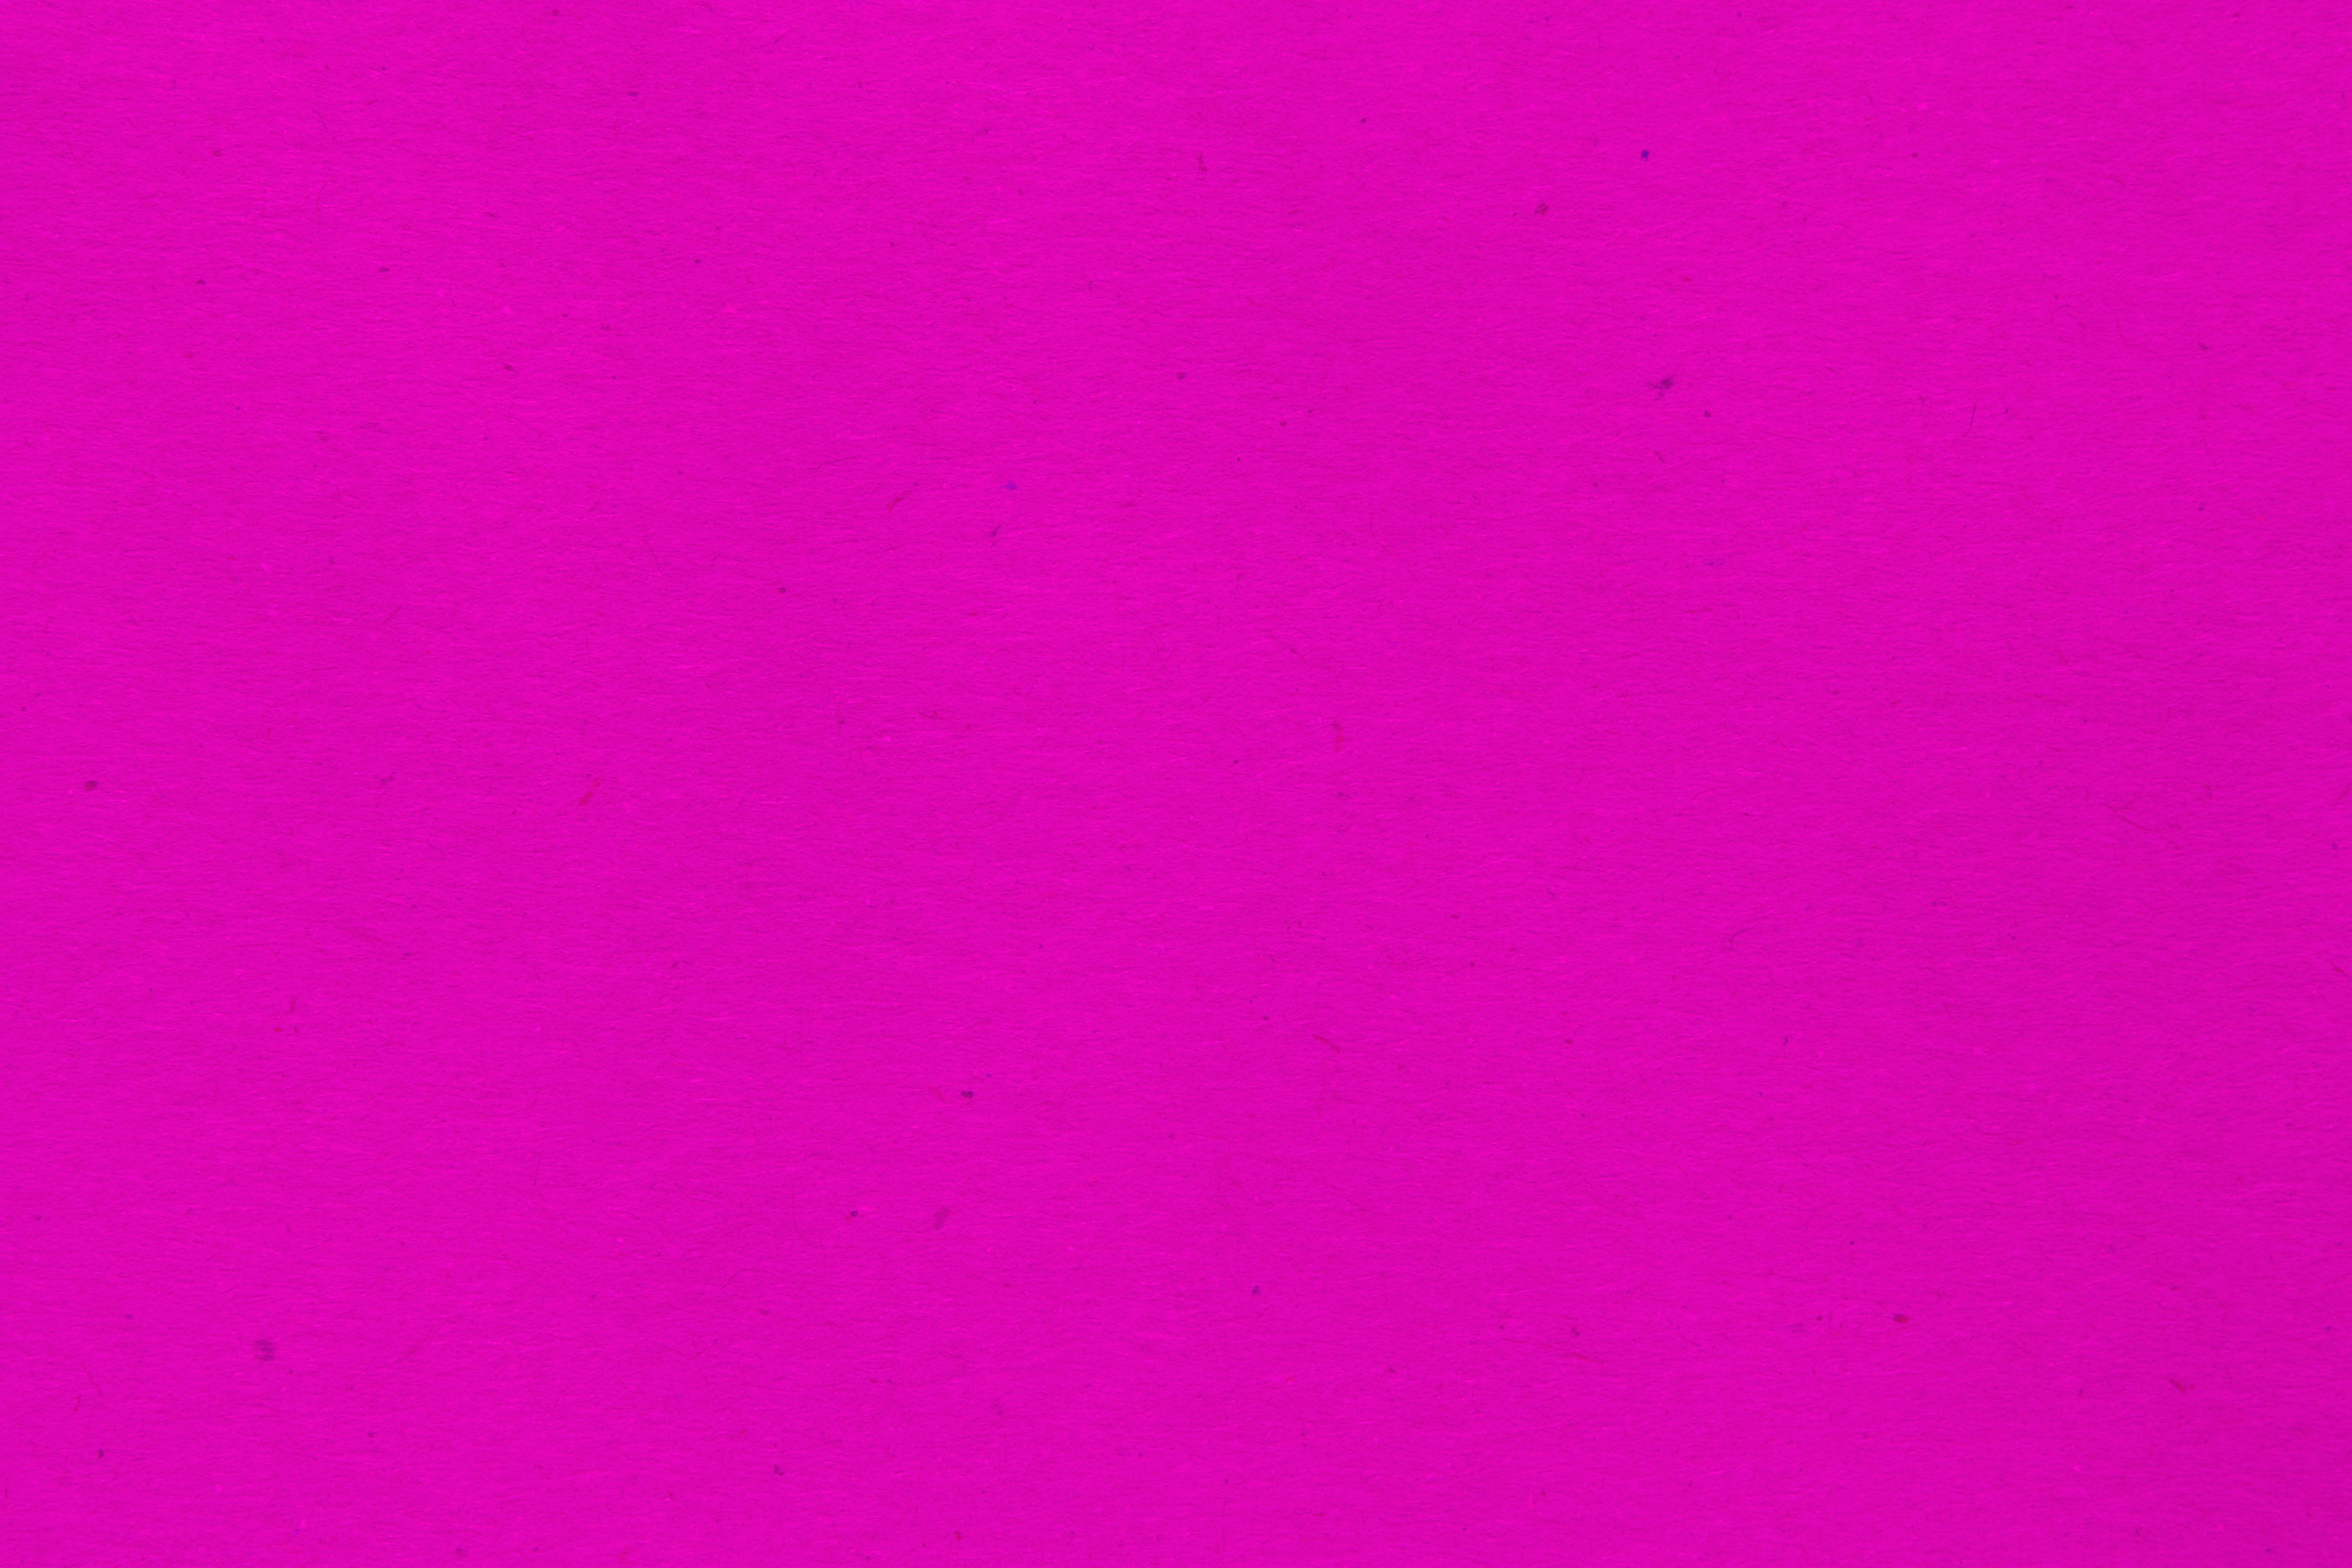 Fuchsia Hot Pink Paper Texture With Flecks Picture Photograph